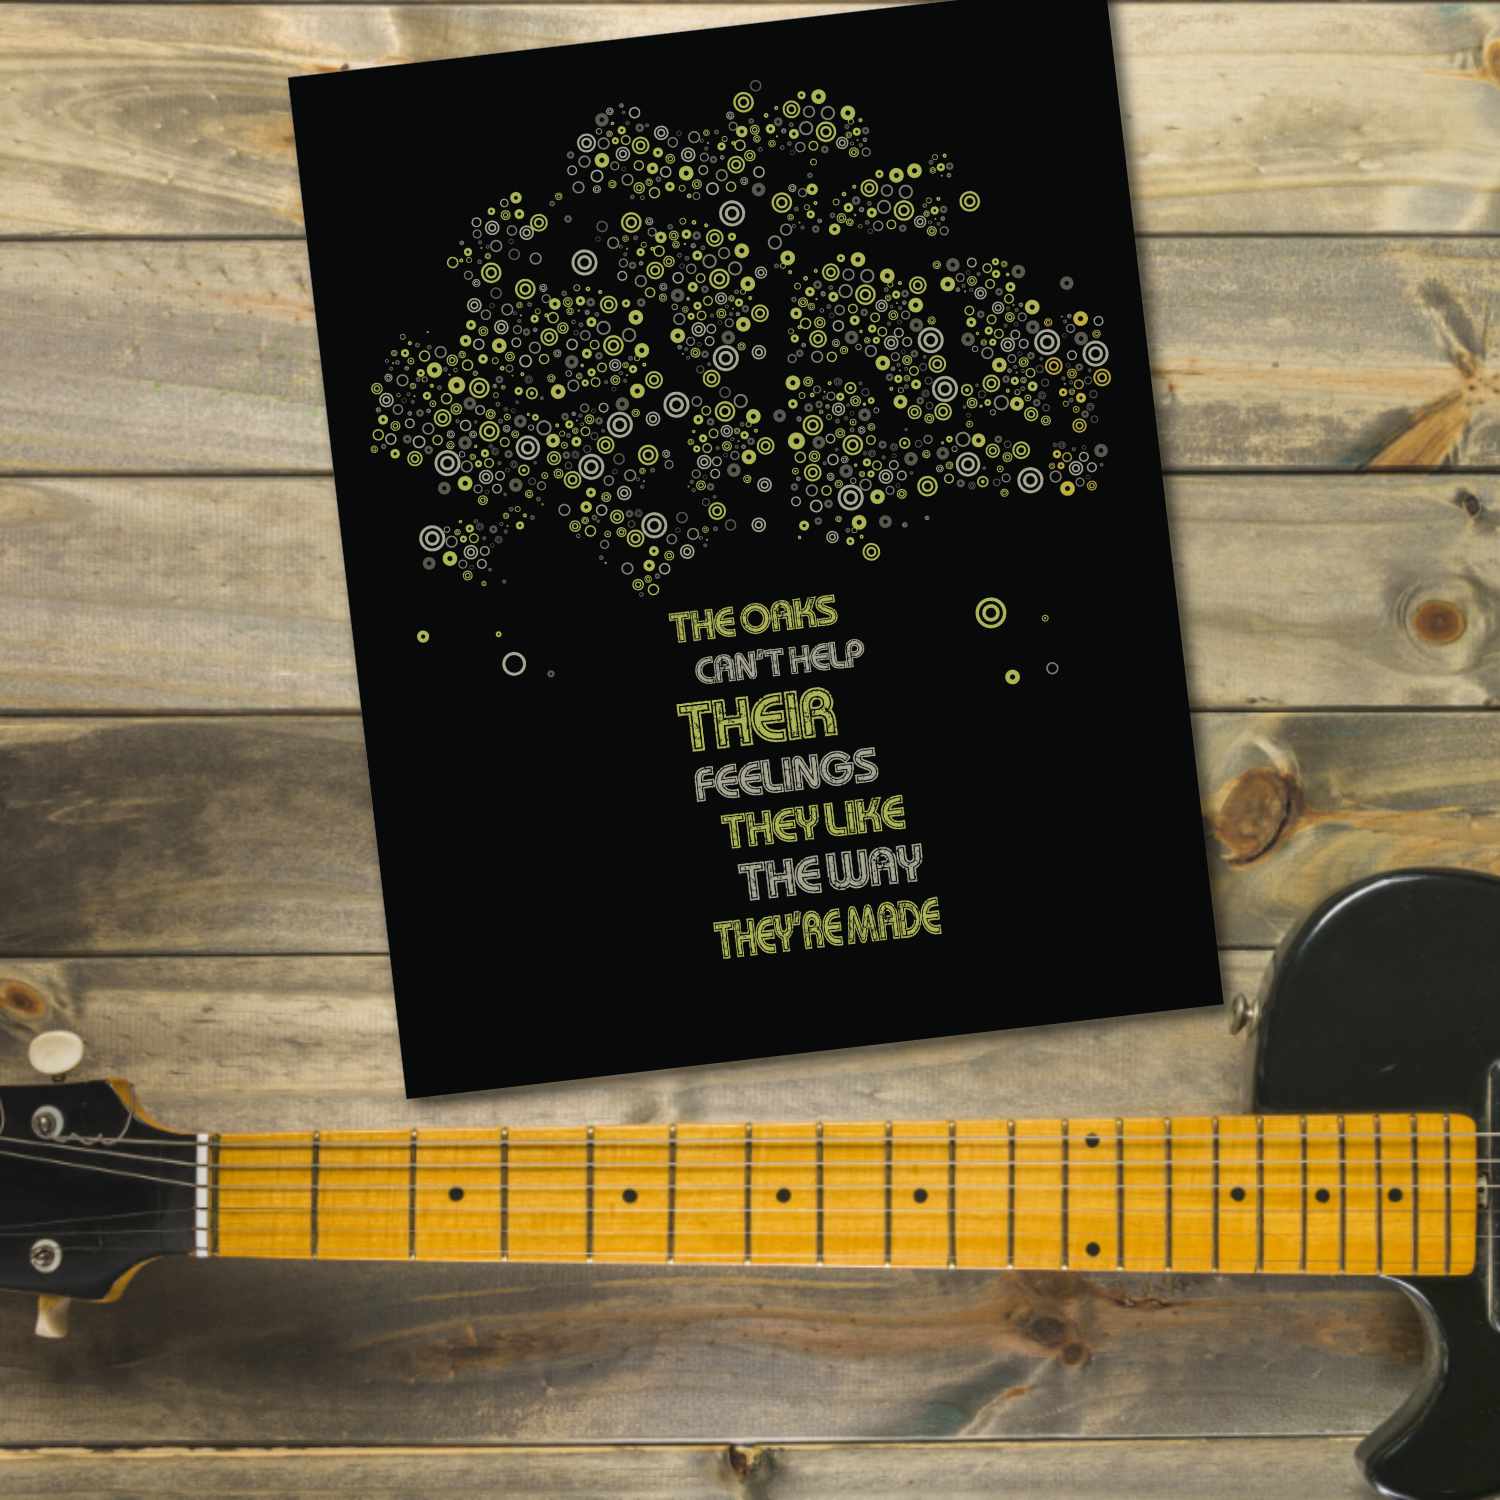 The Trees by Rush - Lyric Inspired Song Art Rock Music Print Song Lyrics Art Song Lyrics Art 8x10 Unframed Print 